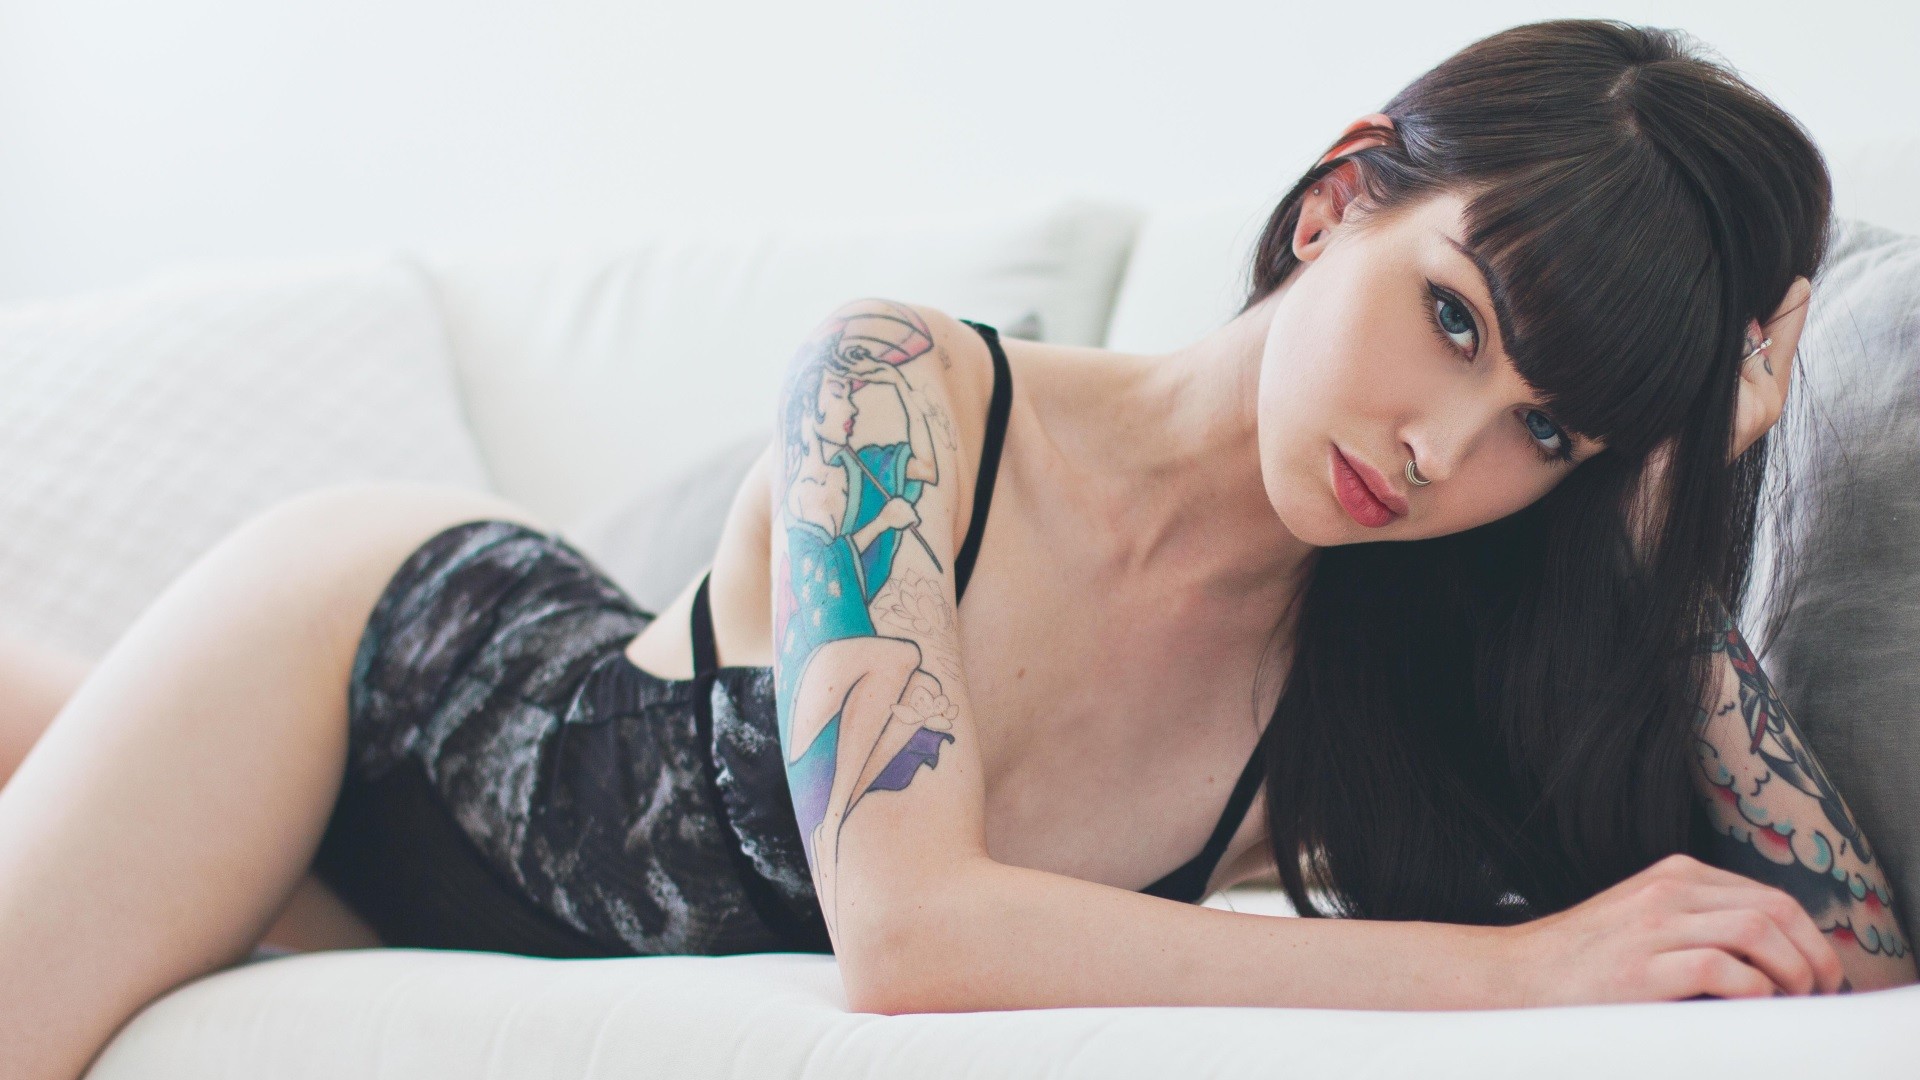 People 1920x1080 black hair tattoo black lingerie contact lenses Suicide Girls Ashley Holat inked girls body lingerie brunette blue eyes women couch pink lipstick face pierced nose lying on front nose ring model septum ring women indoors closeup